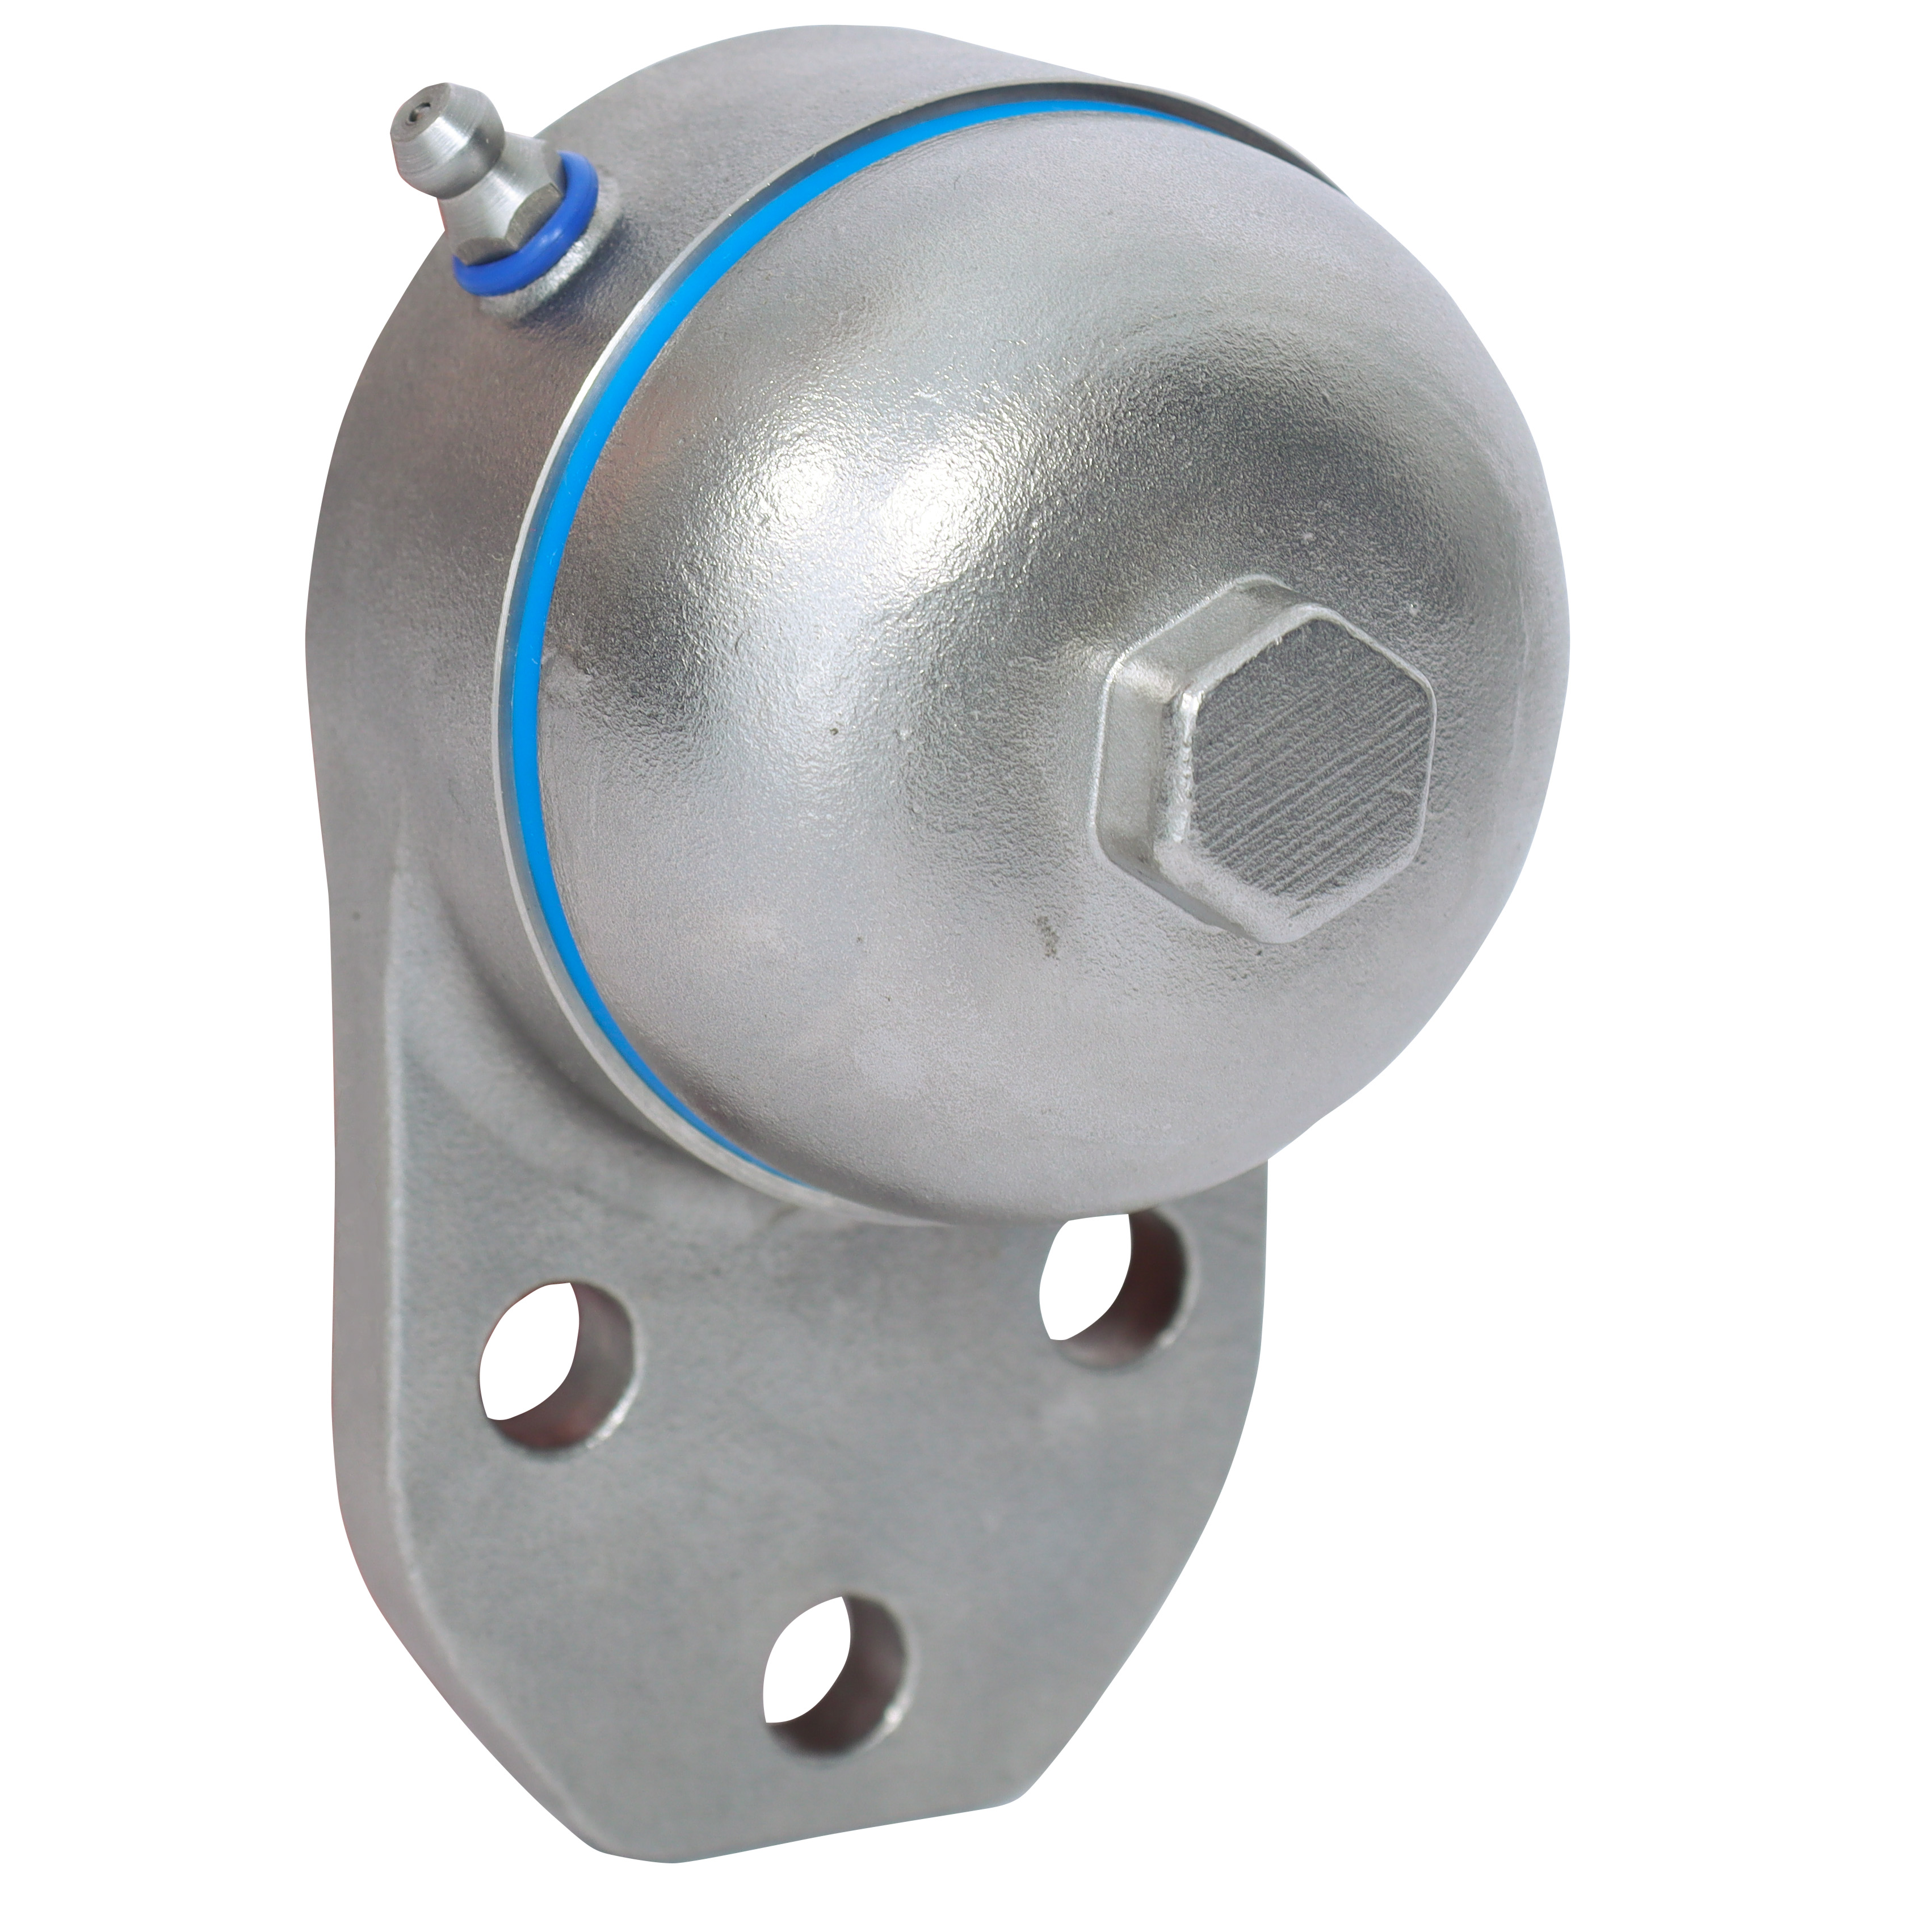 Sealed flange bearing unit for Food Industry - cover - 3 fixing holes - 